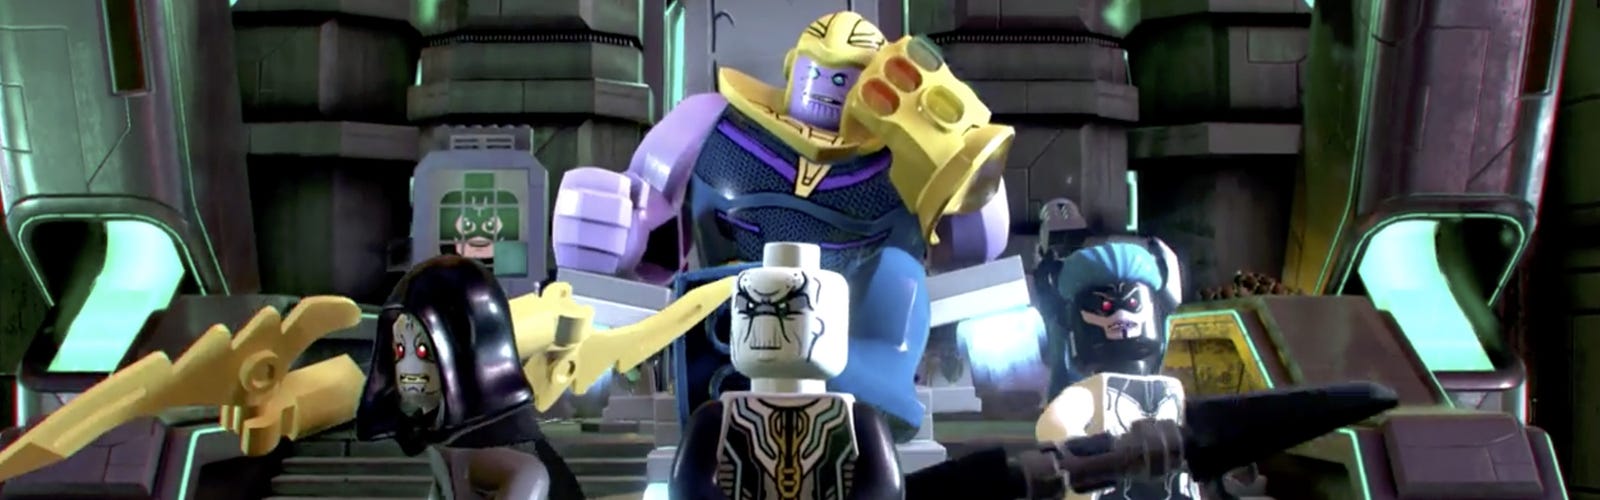 LEGO Marvel Super Heroes Is The Best Modern LEGO Game, And It's